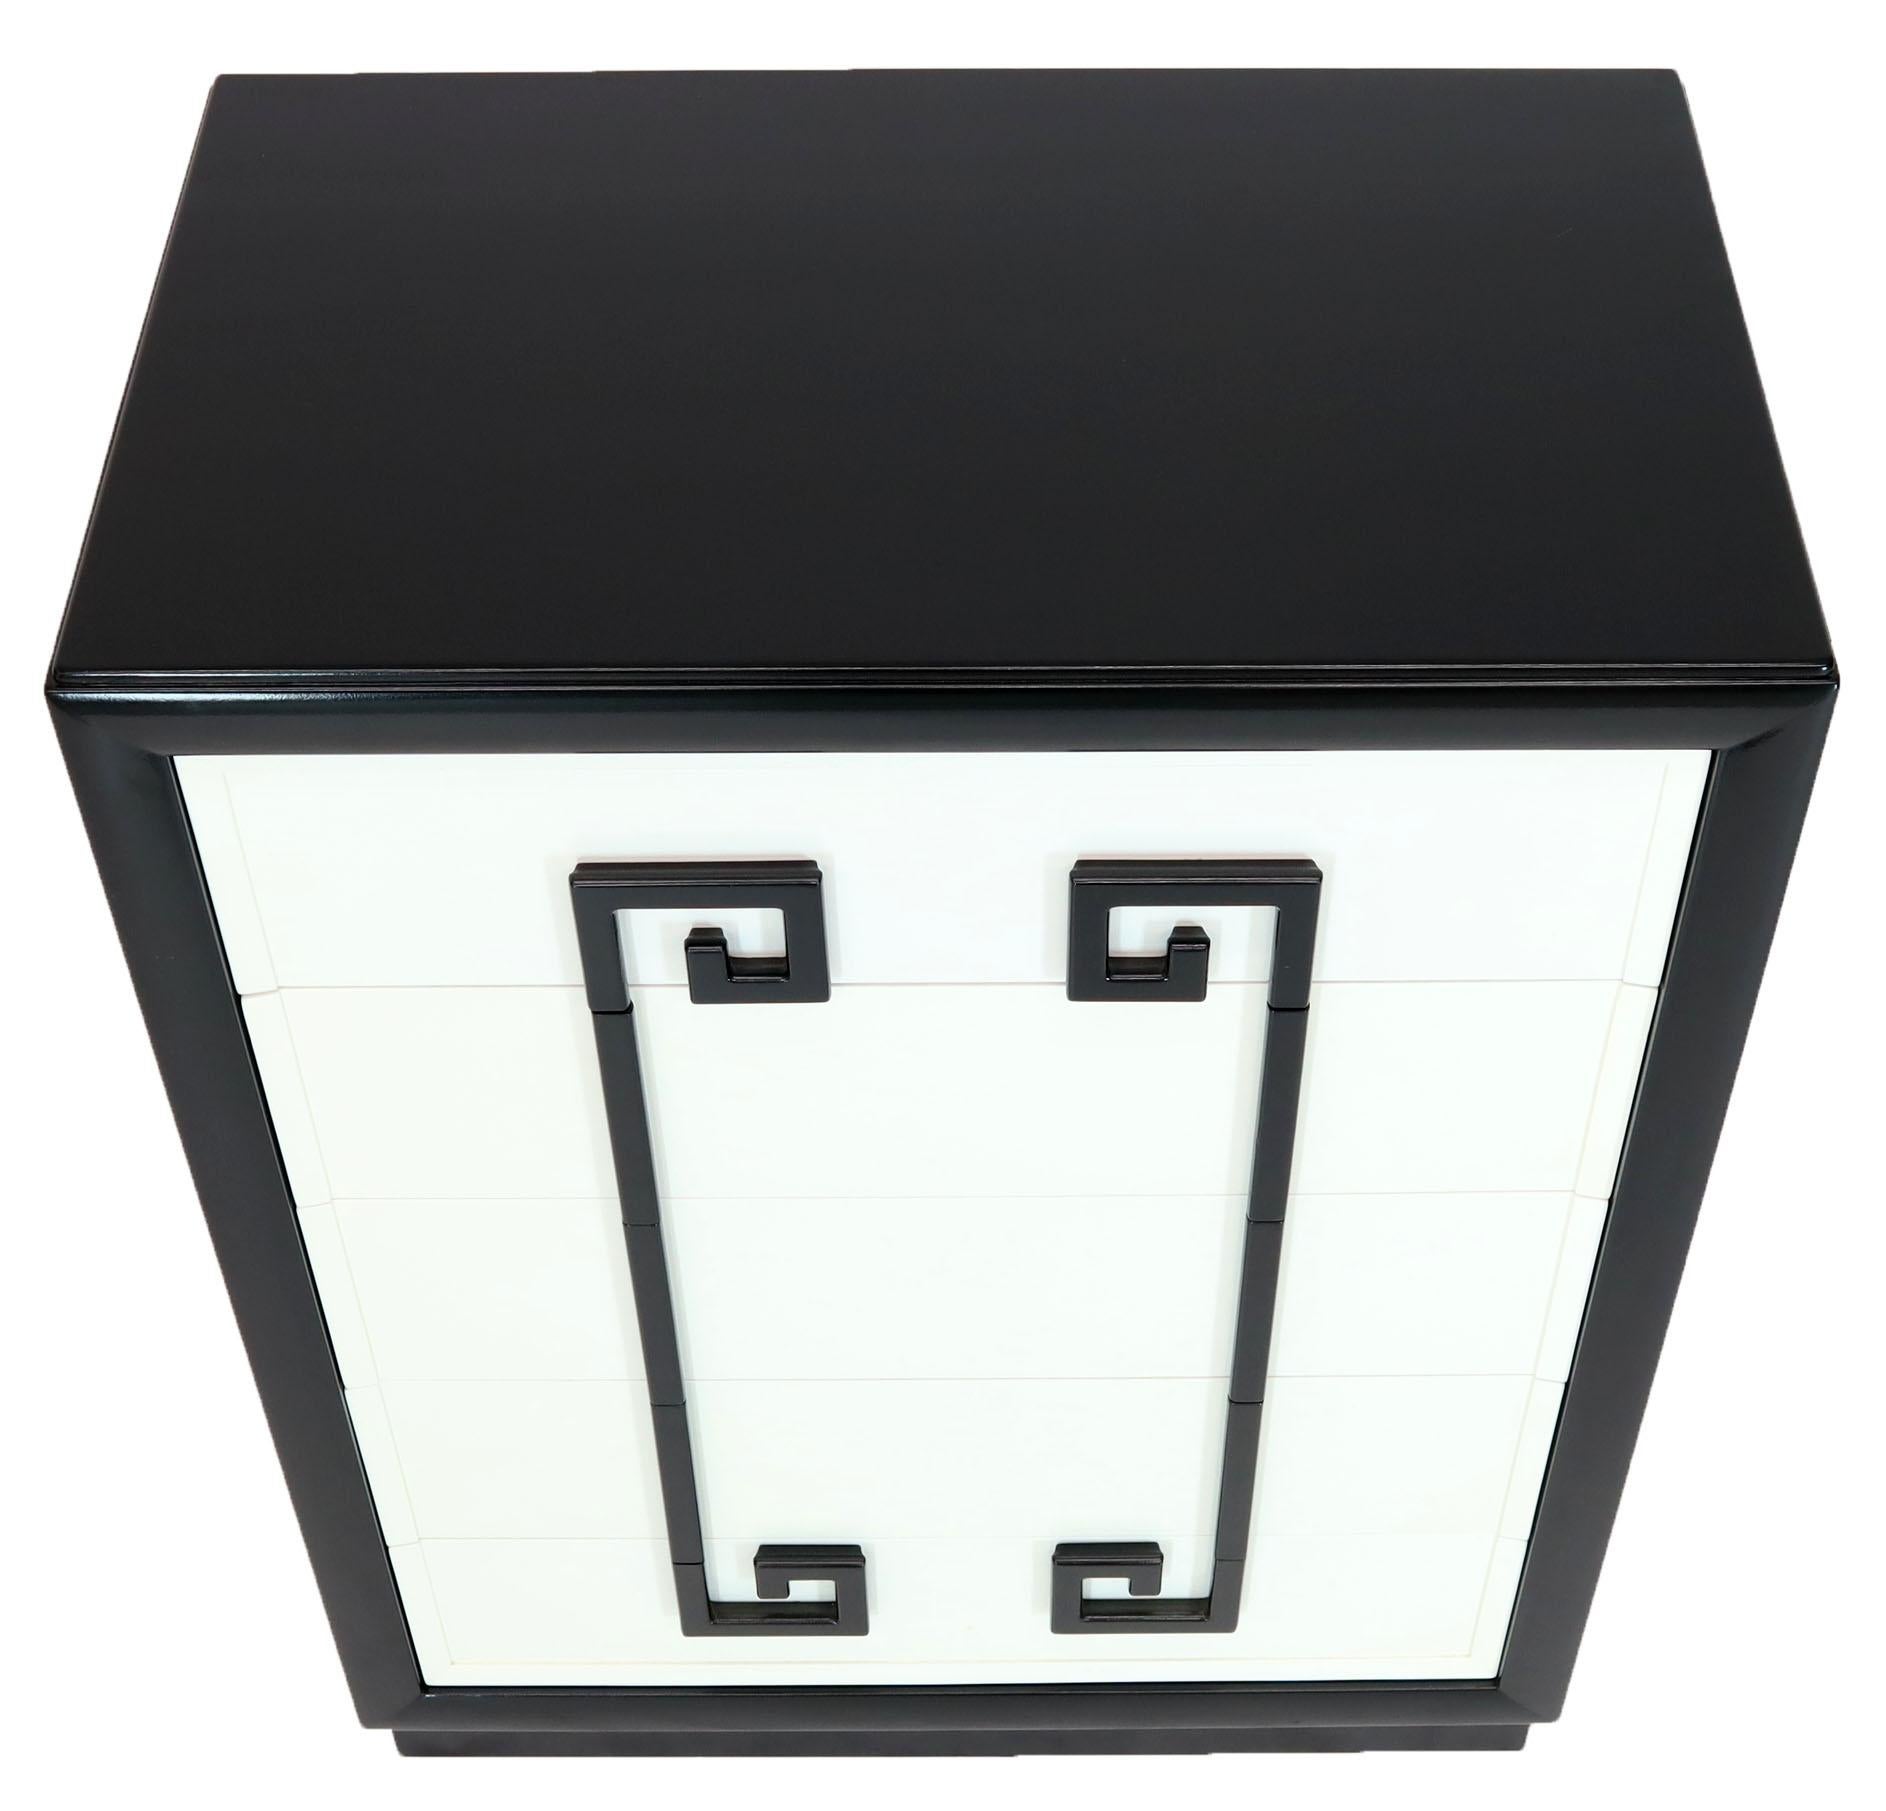 20th Century Kittinger Mandarin Style Chest Dresser Black and White Lacquer Five Drawers For Sale